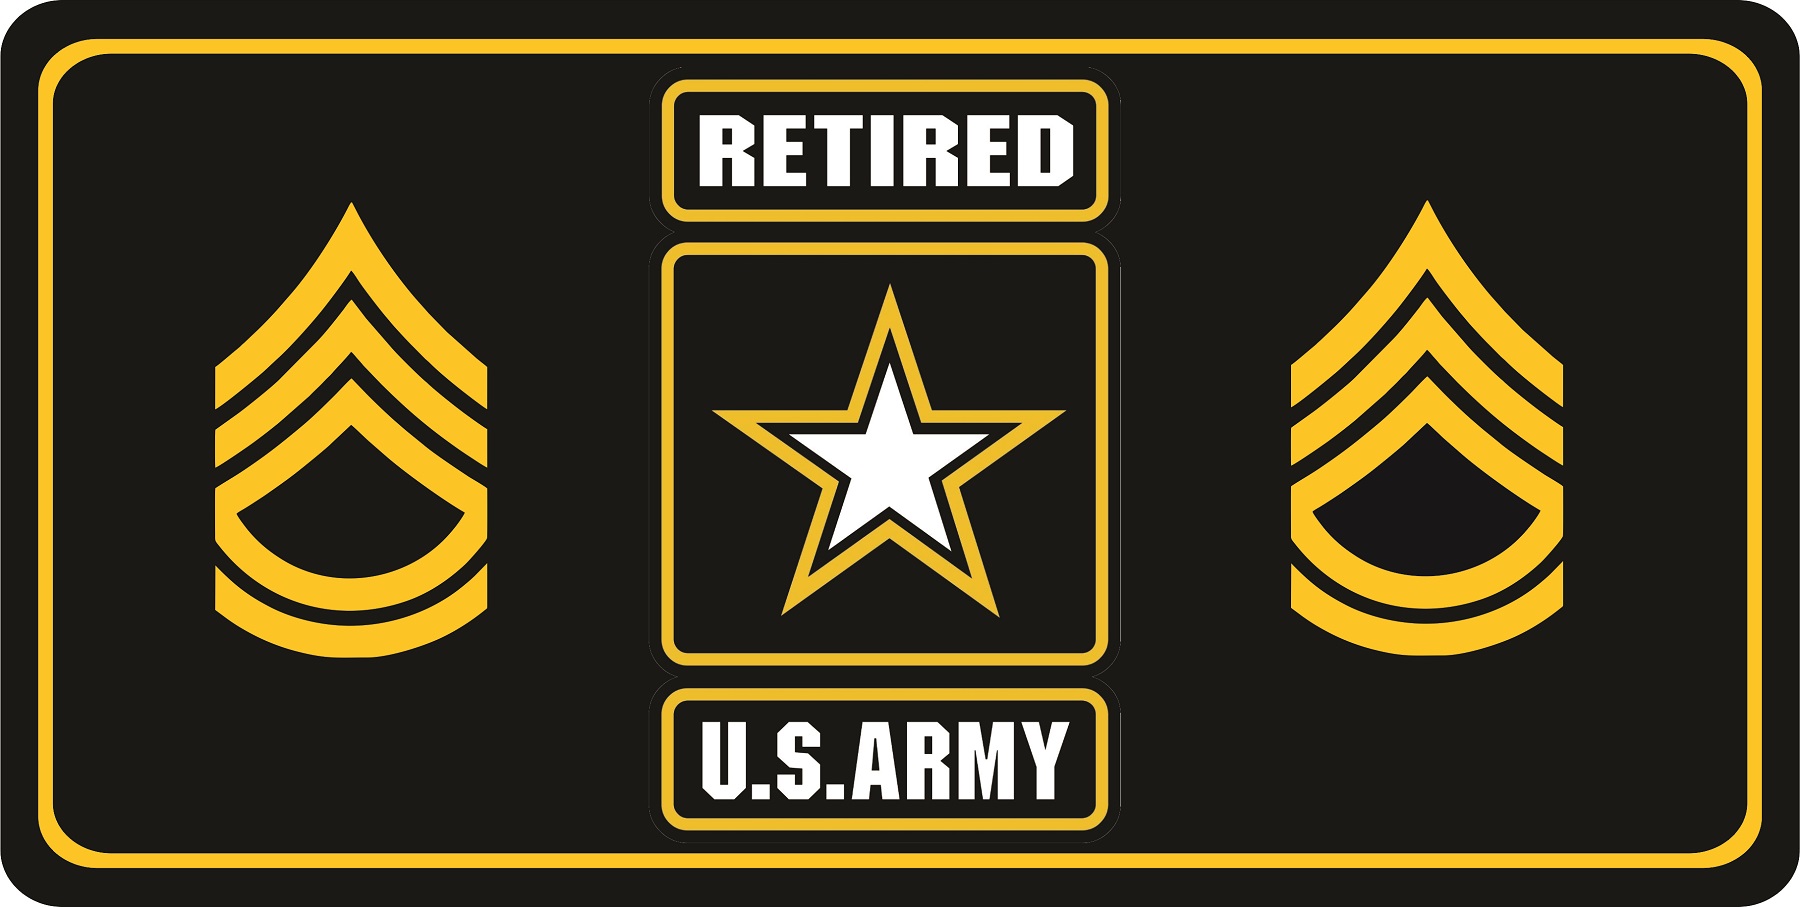 U.S. Army Sergeant First Class Retired Photo LICENSE PLATE